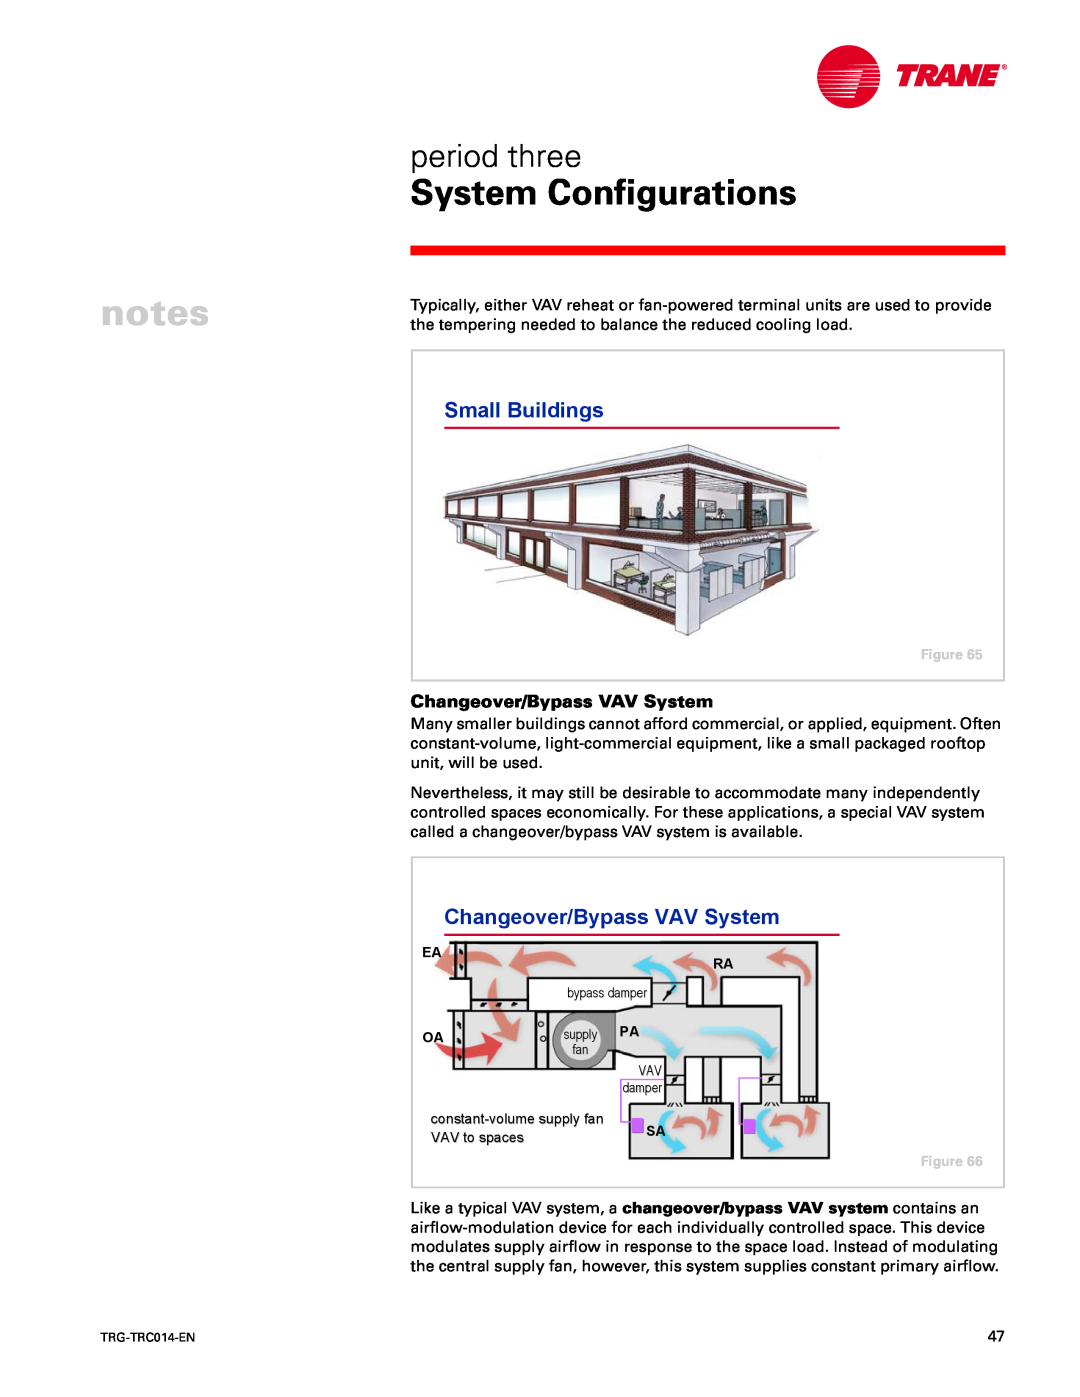 Trane TRG-TRC014-EN manual Small Buildings, Changeover/Bypass VAV System, System Configurations, period three 